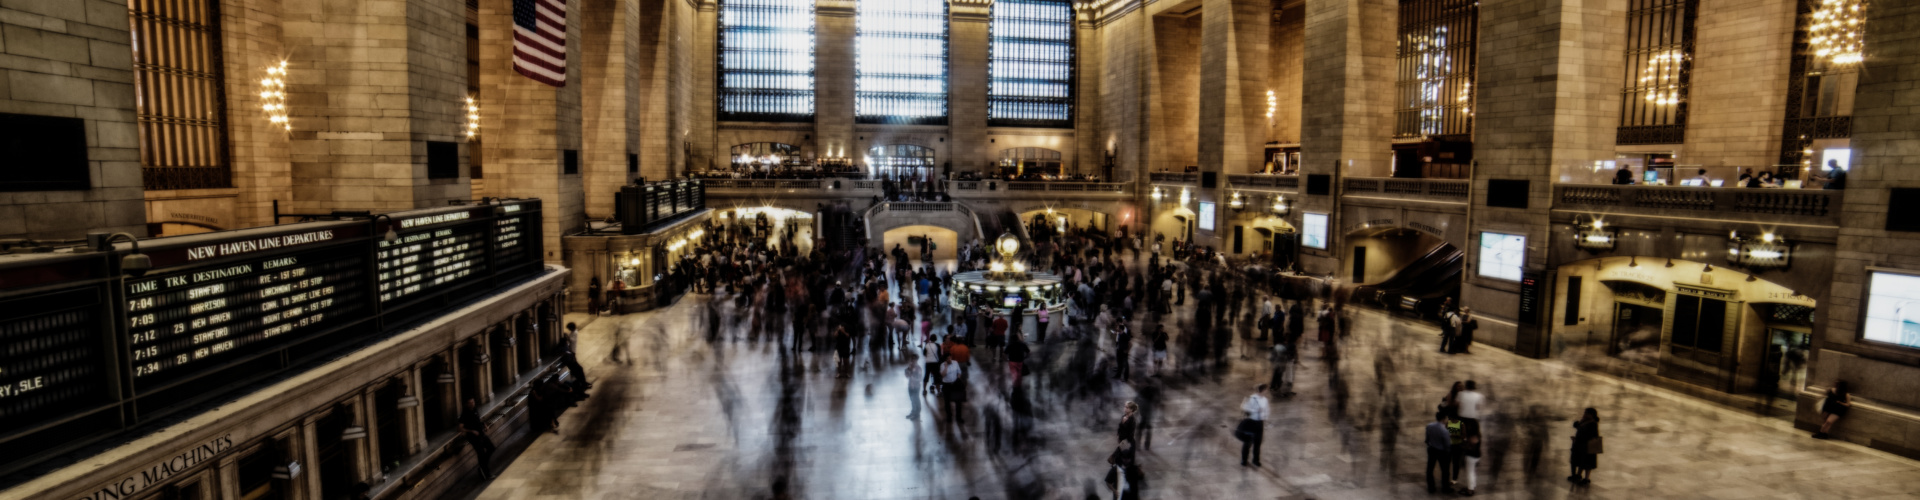 Focal Point: 7 Pictures of Grand Central Terminal